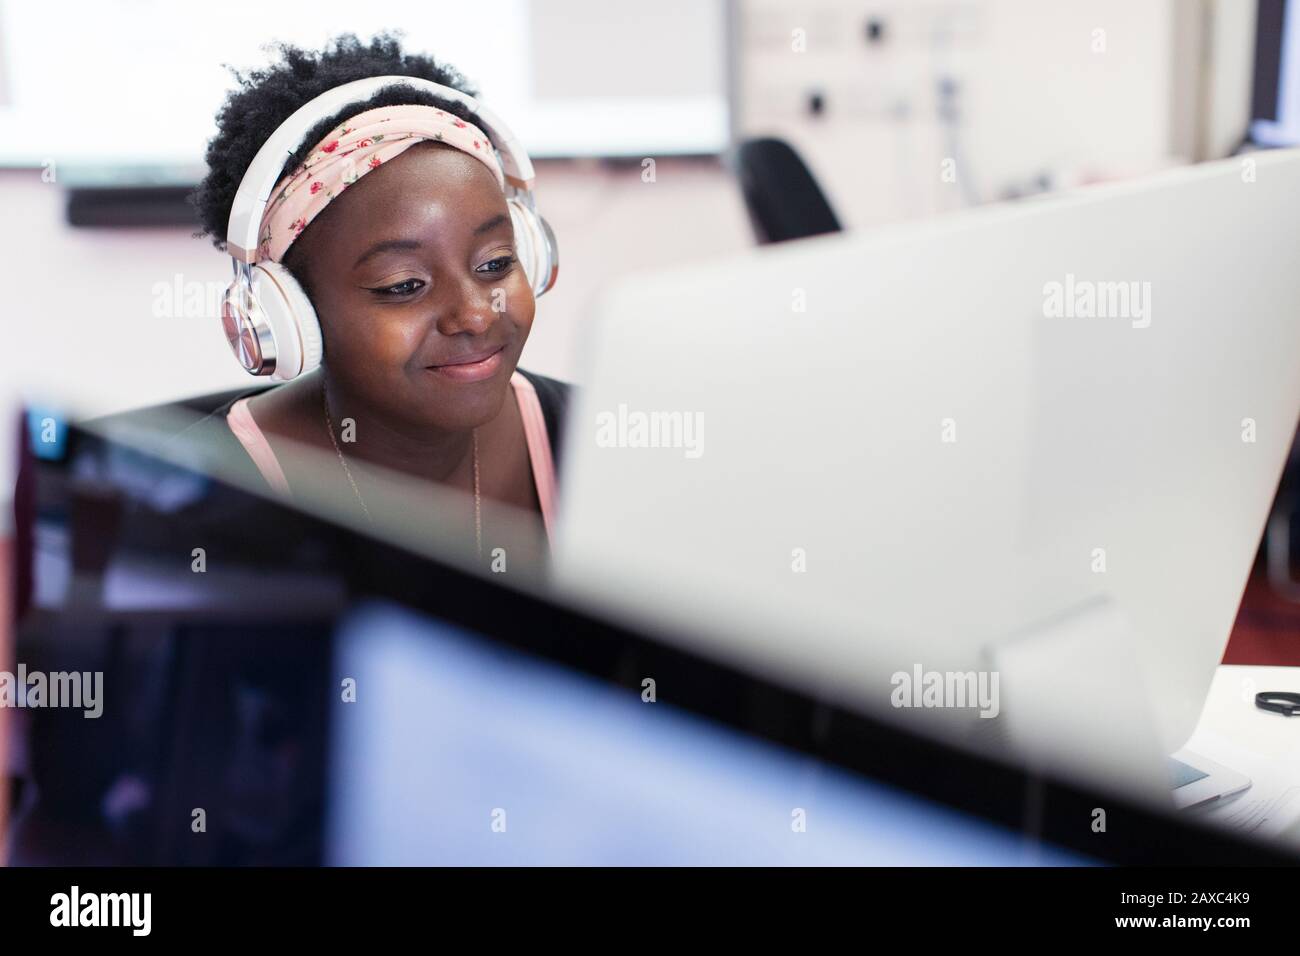 Smiling female community college student with headphones at computer in classroom Stock Photo